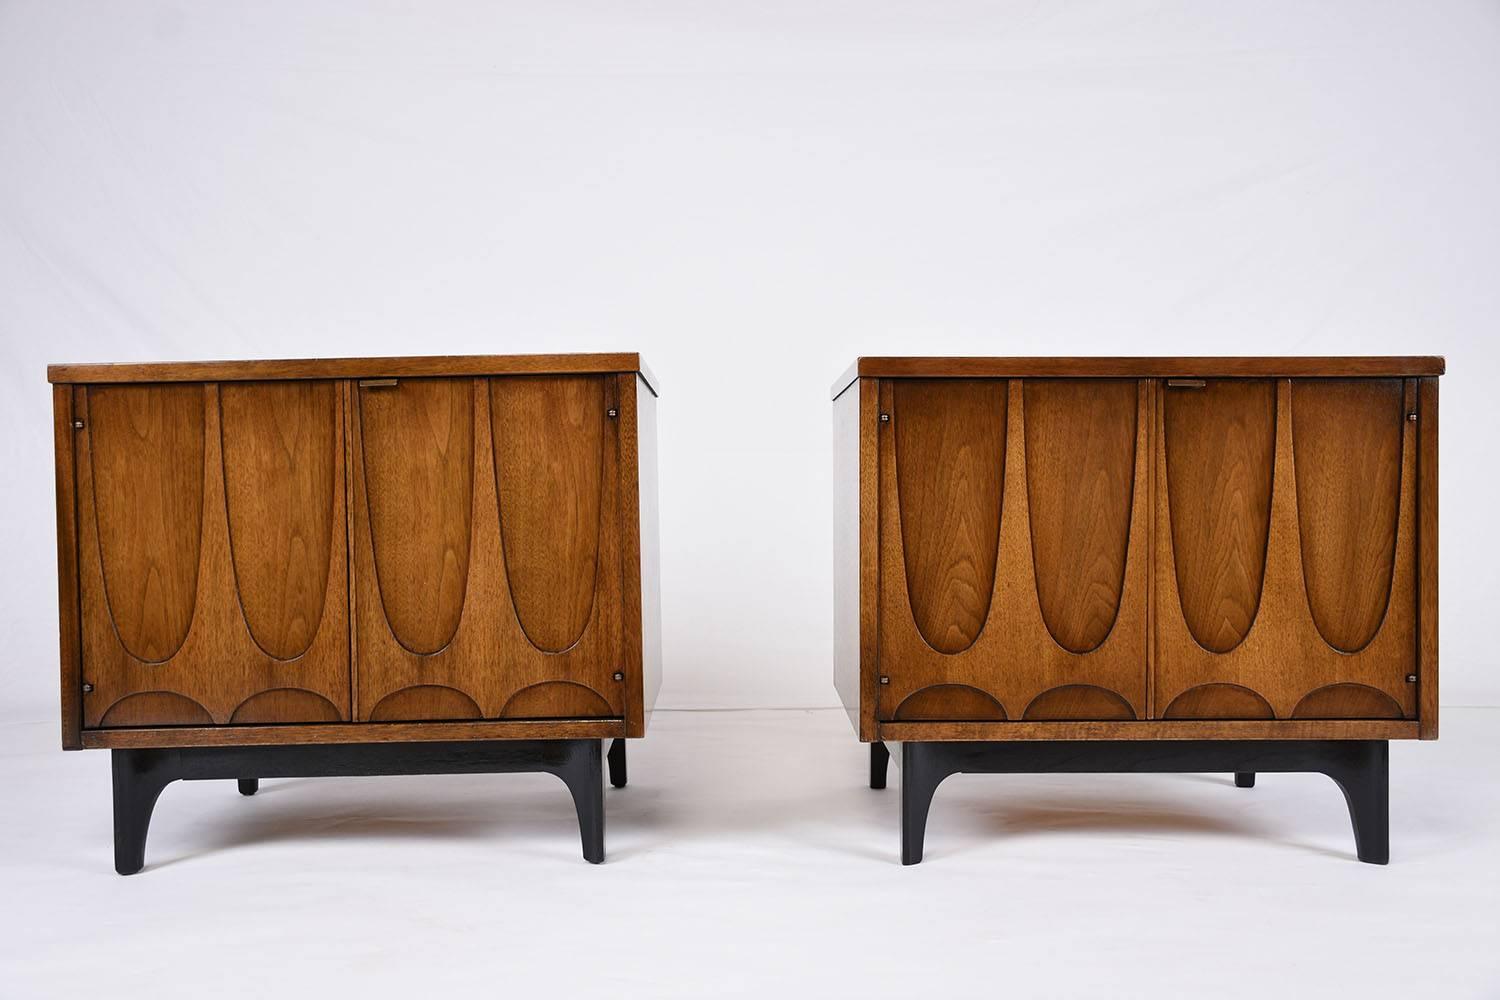 This 1960s vintage Mid-Century Modern-style pair of nightstands are made by Broyhill Brasilia. The nightstands are made from carved walnut wood that is finished in a rich walnut color stain. The facades of the doors feature the characteristic